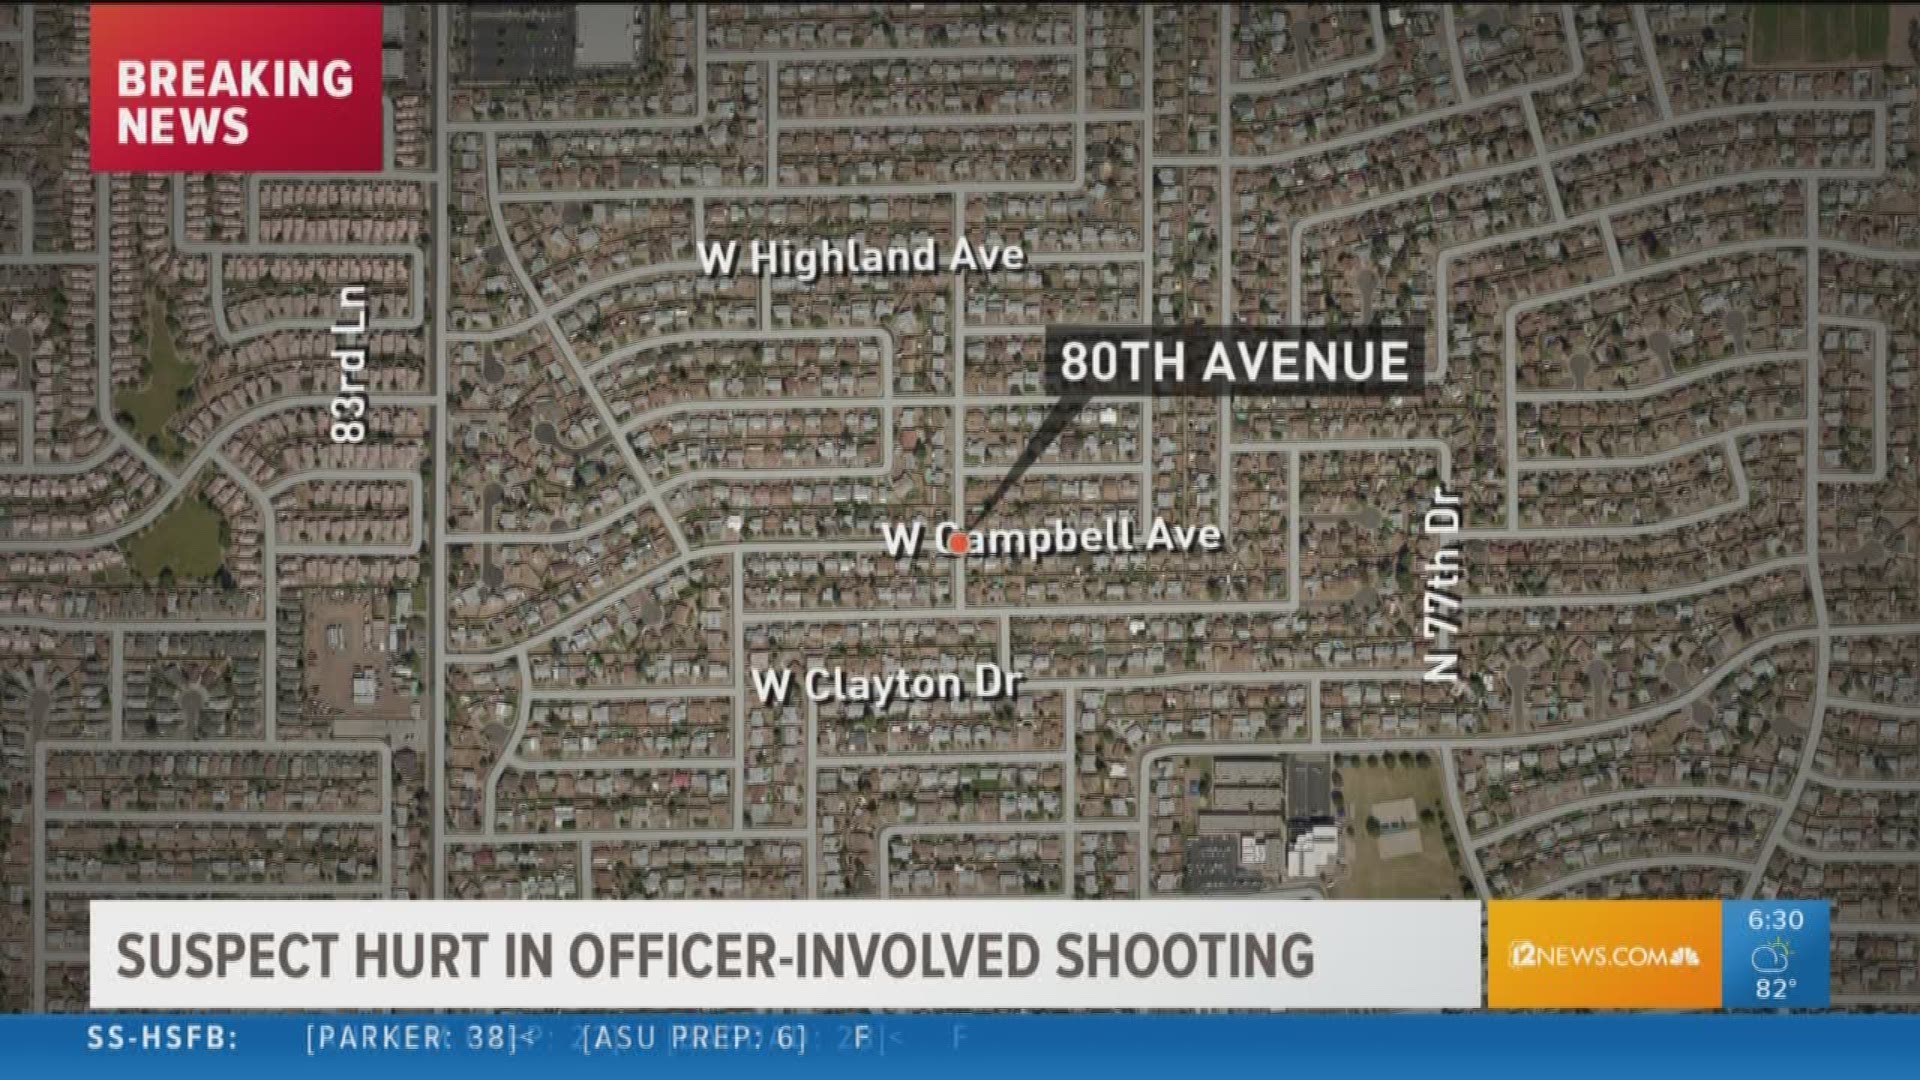 Suspect hurt in officer-involved shooting near 80th and Campbell avenues.